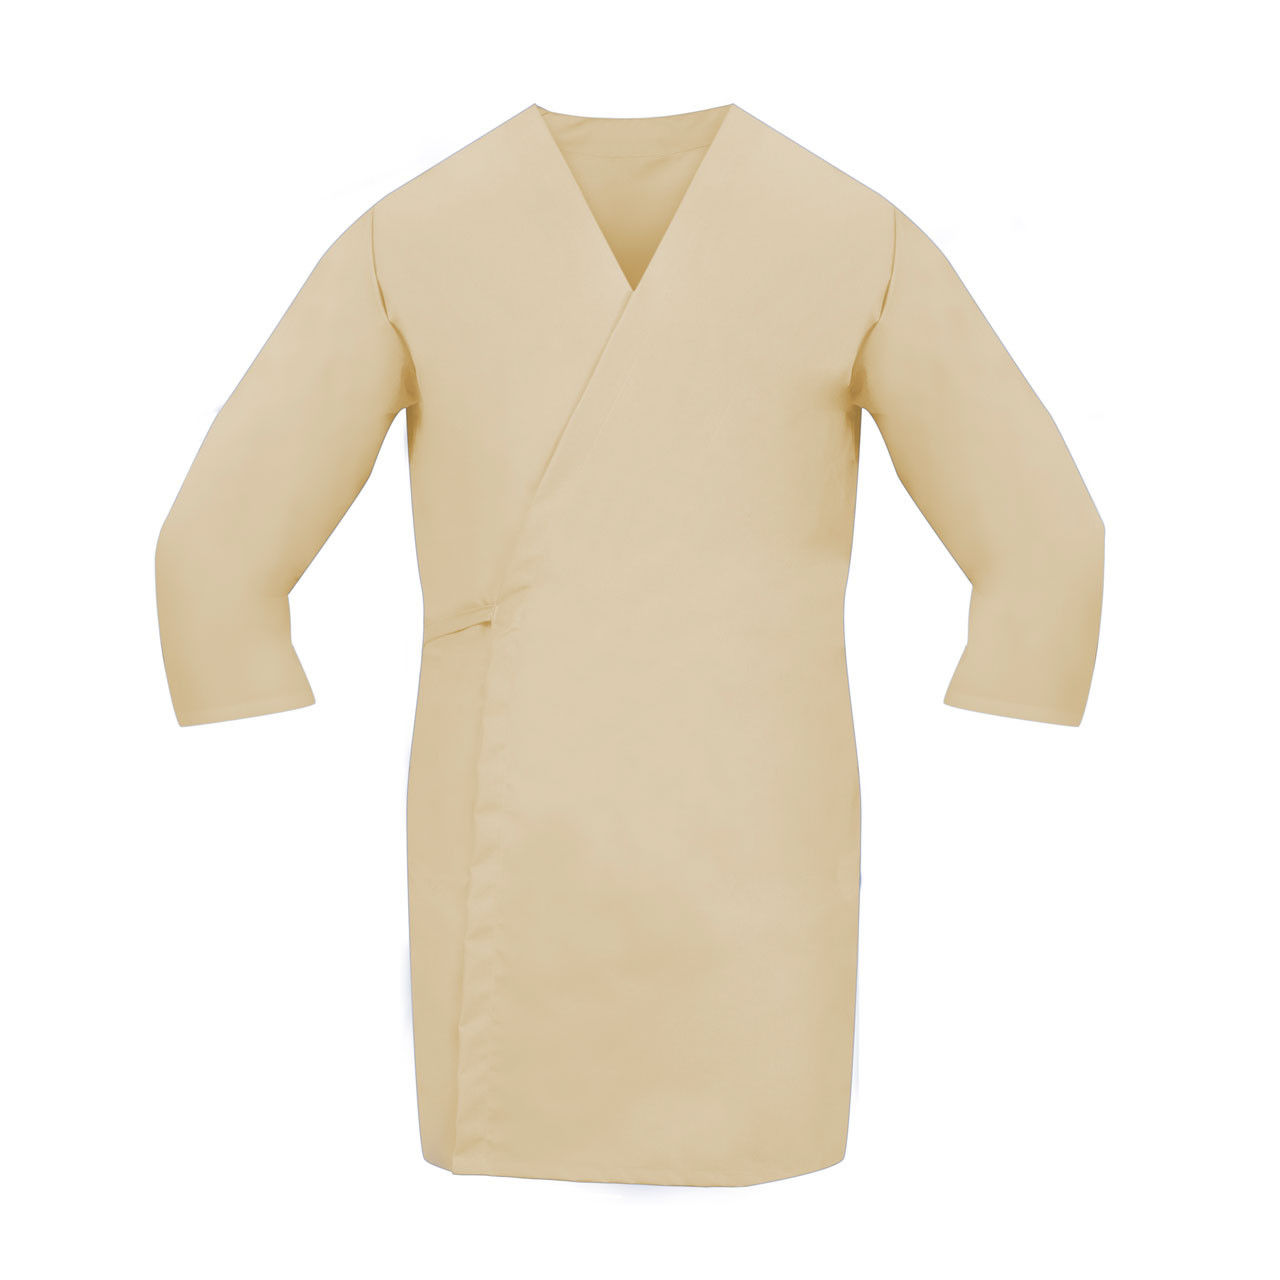 Do all sizes of the Tan Smock Wraps come ready-made?